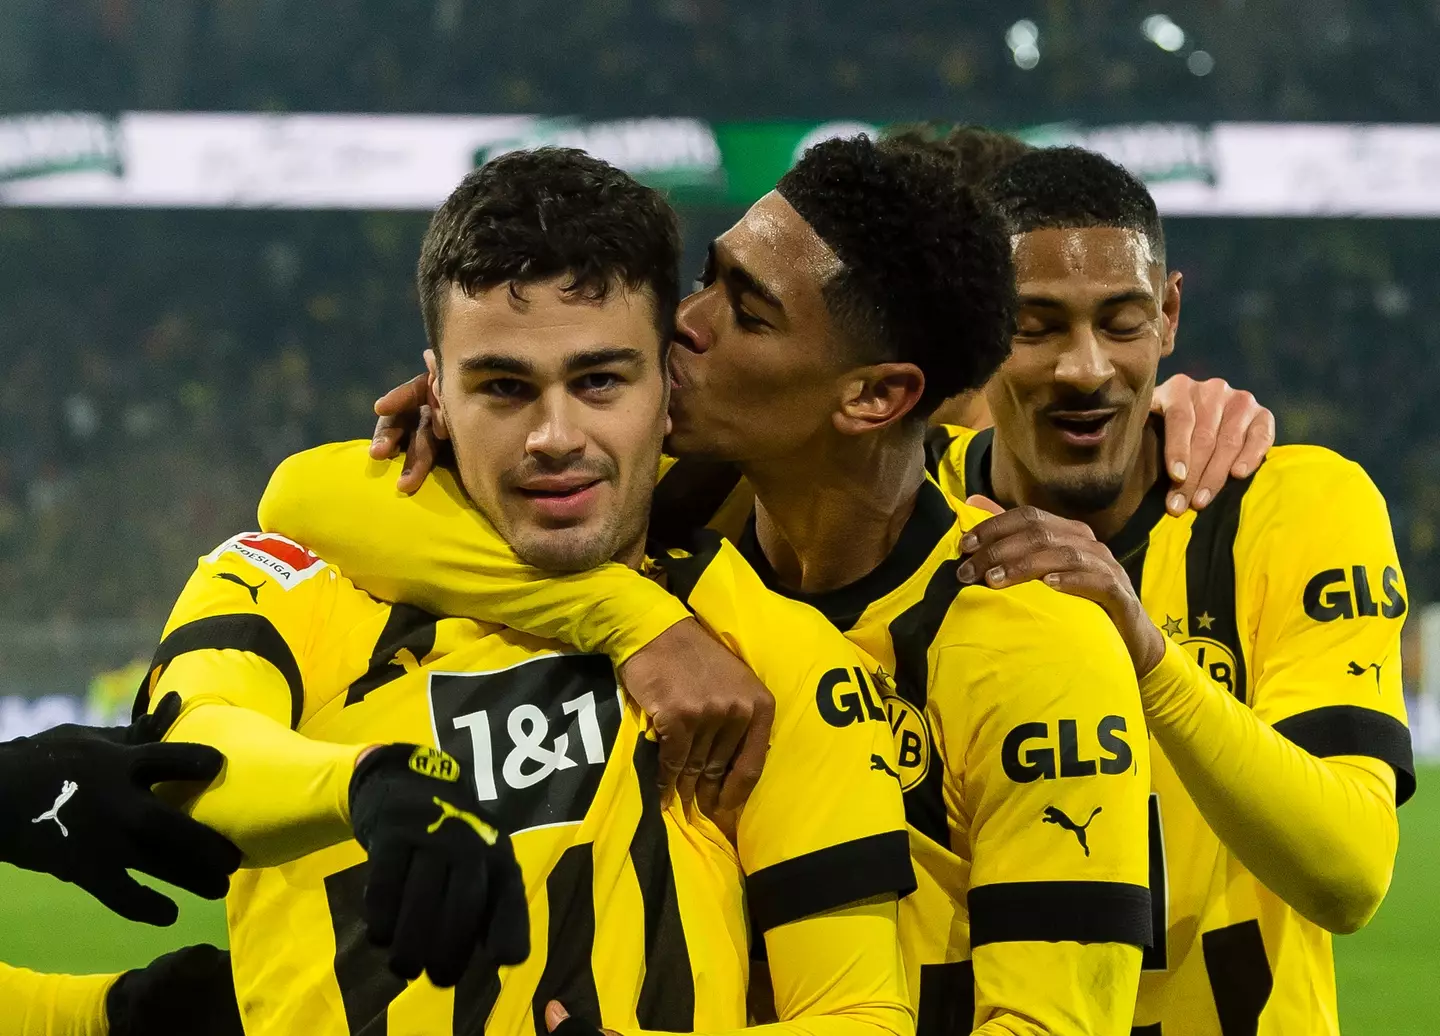 Jude Bellingham plants a kiss on Giovanni Reyna after a goal for Borussia Dortmund. Image: Getty